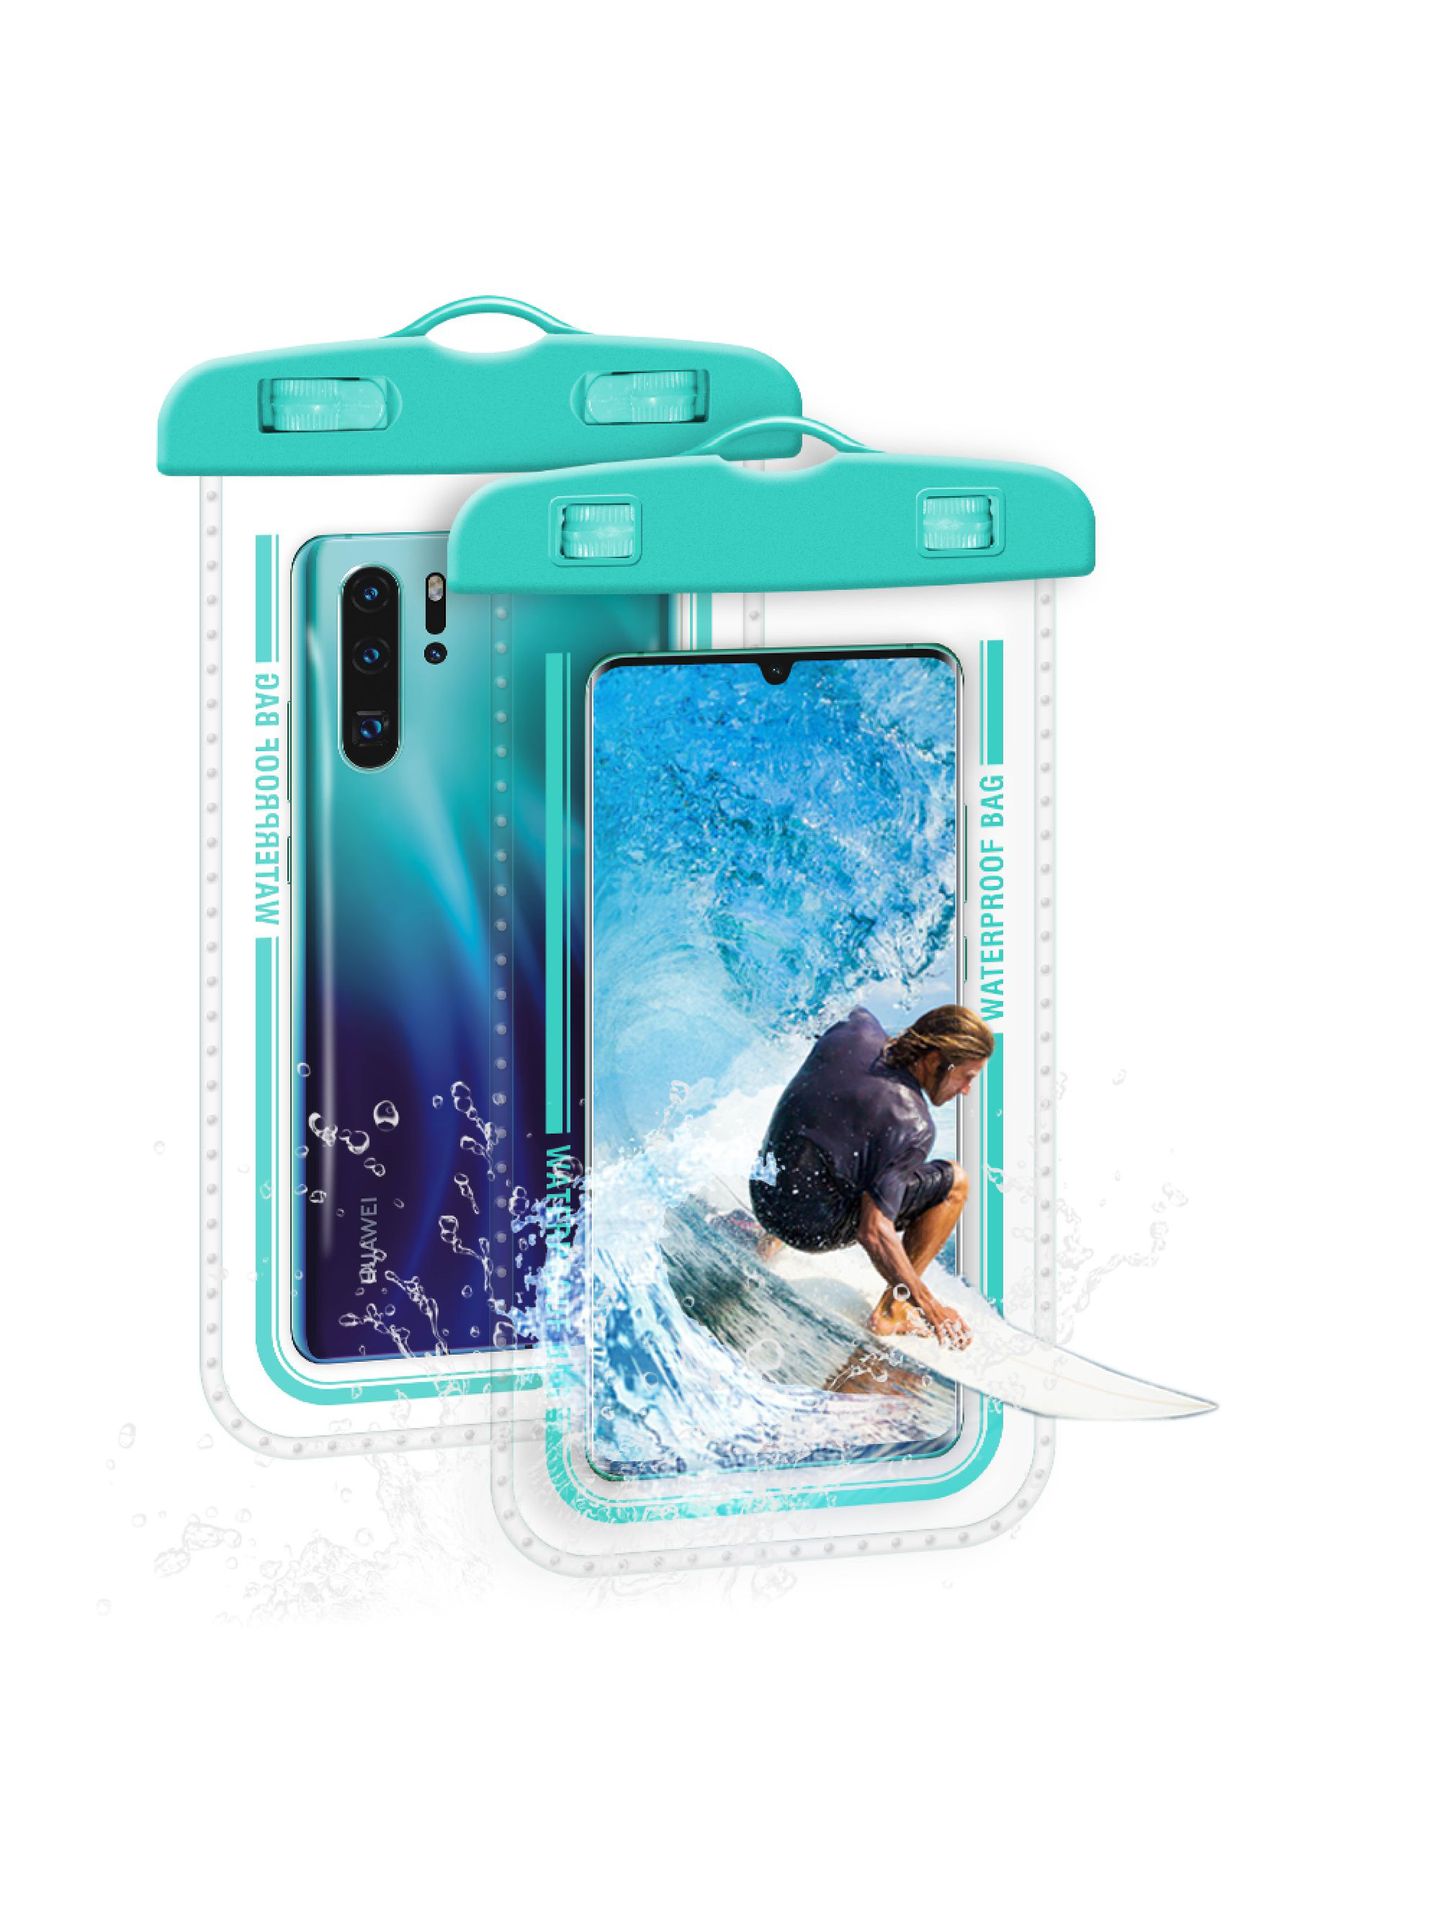 99% universal phone waterproof cover protective case new diving large transparent swimming cellphone waterproof bag wholesale